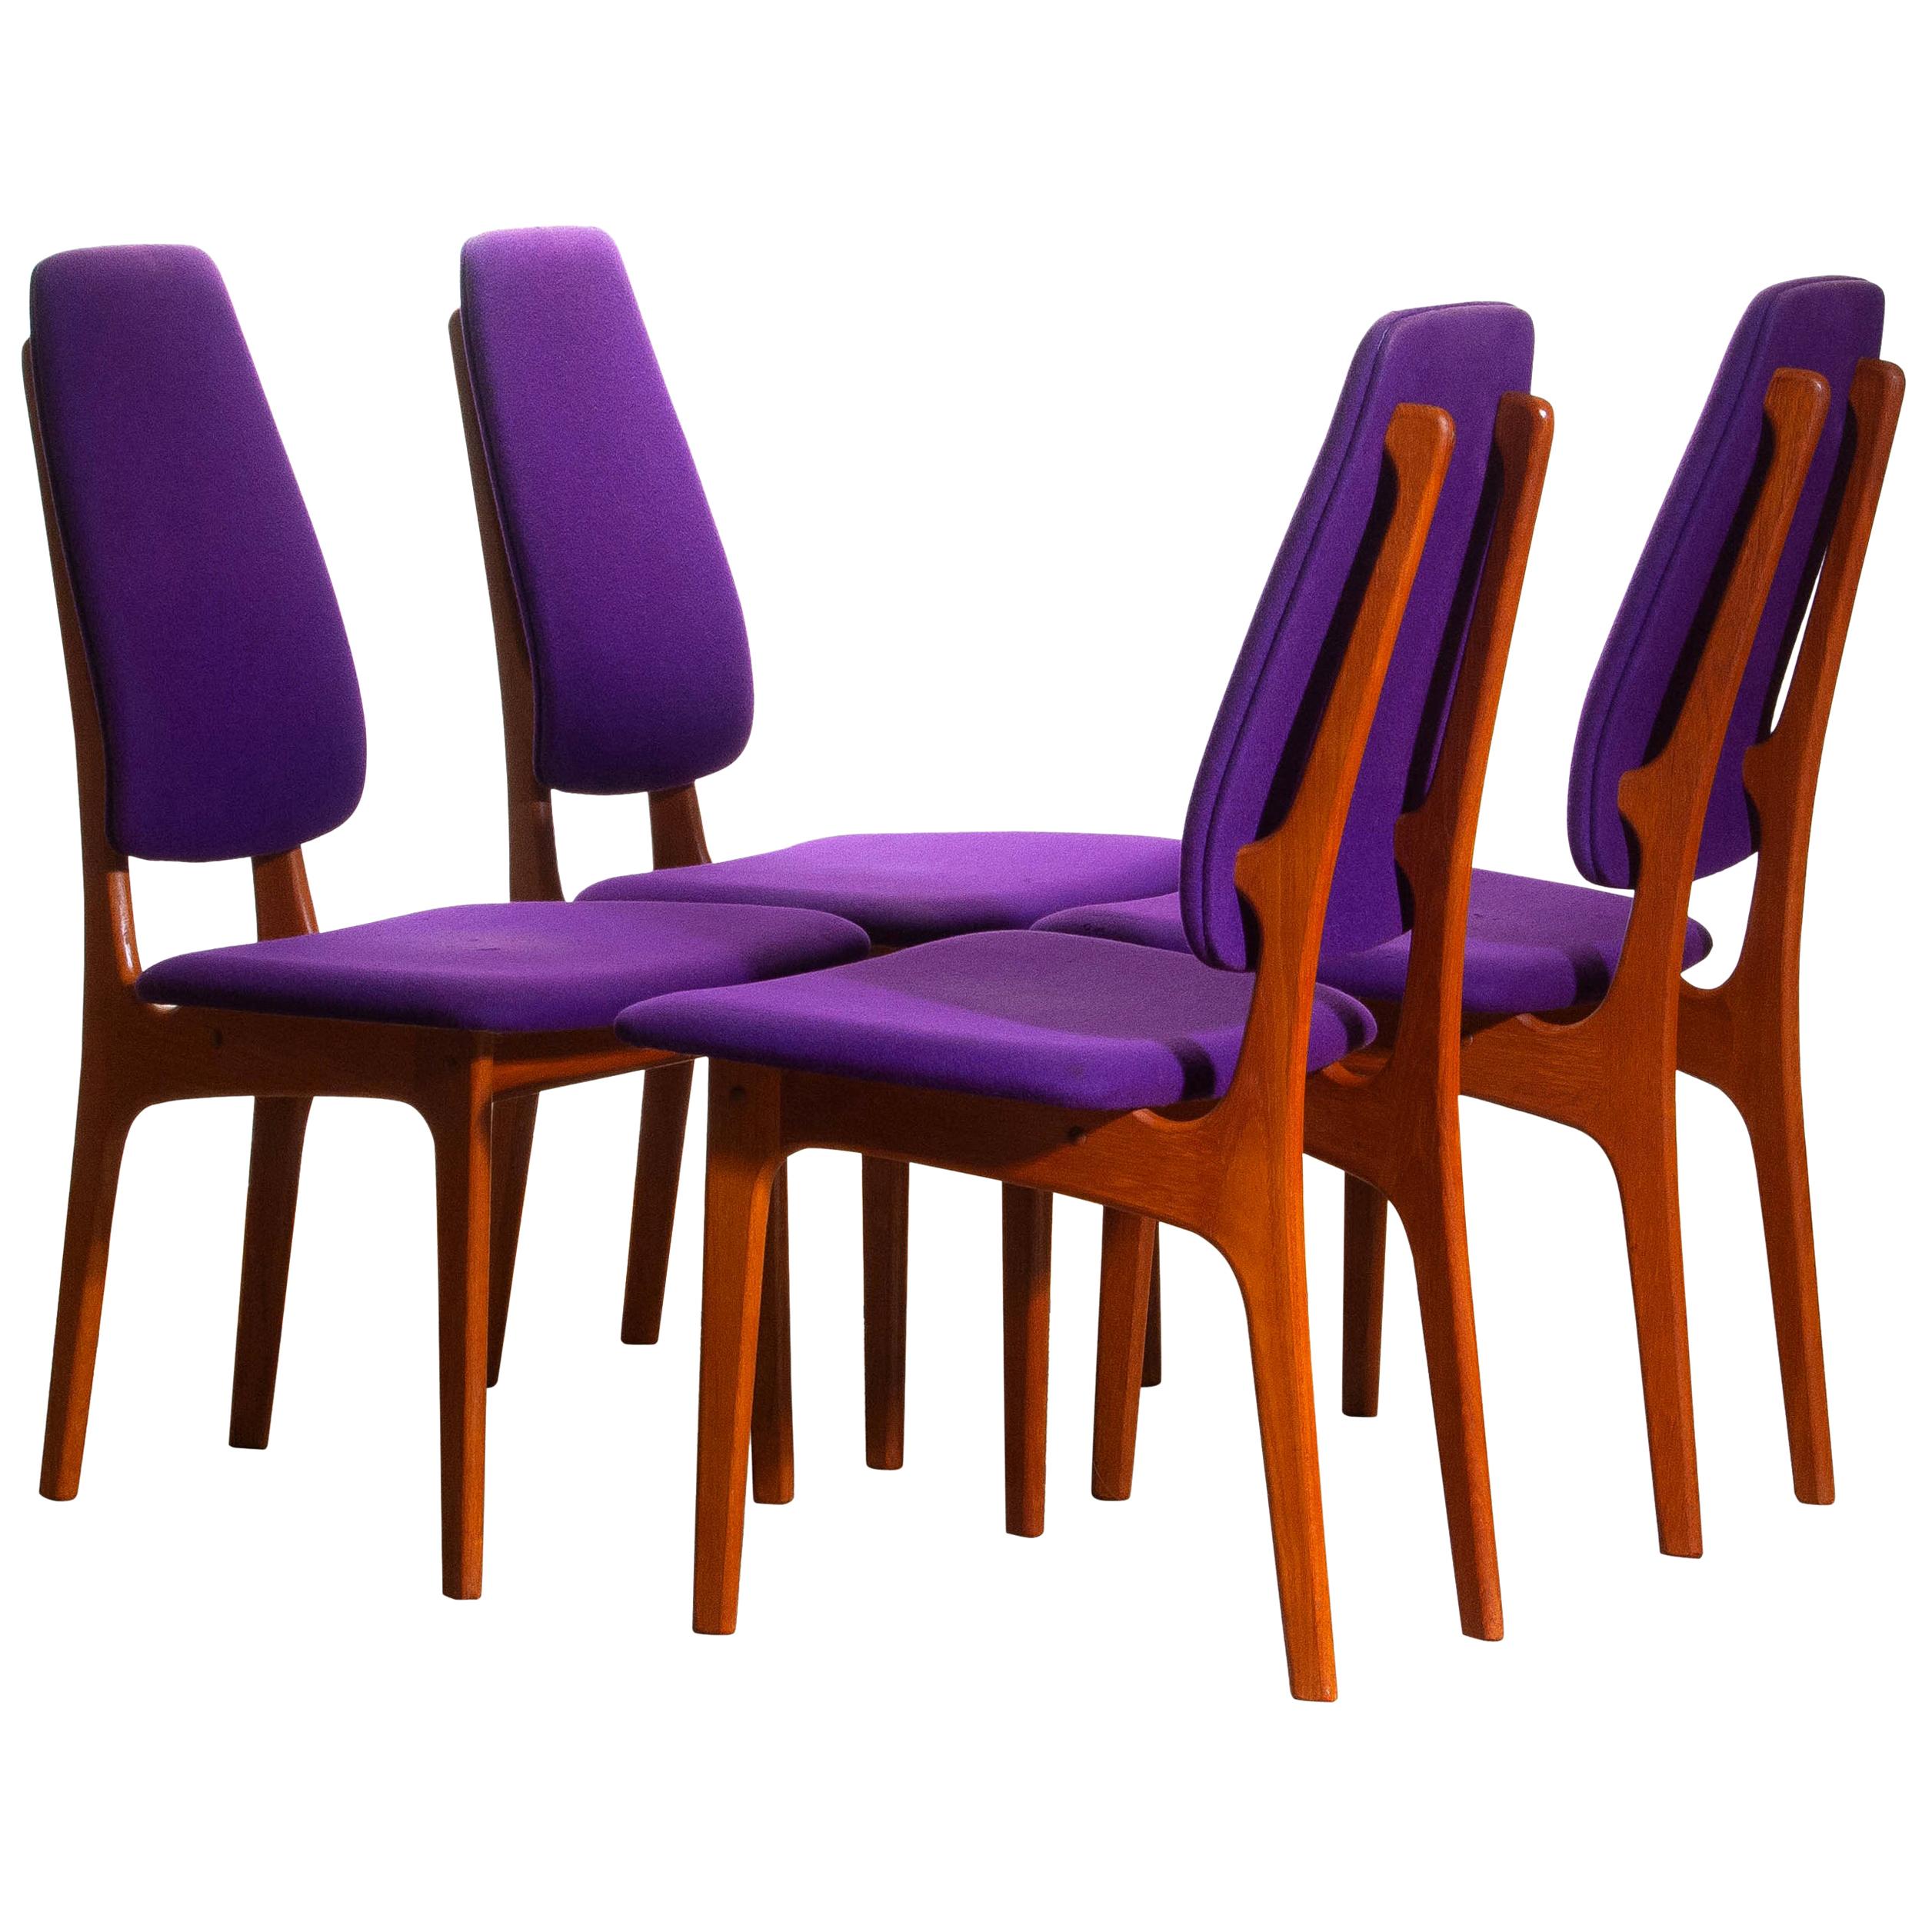 Rare set of four dining chairs from the 1960s in teak designed by Erik Buch for O.D. Möbler A.S., Denmark.
Beautiful aspect are the slim and high back rests.
Chairs are marked 